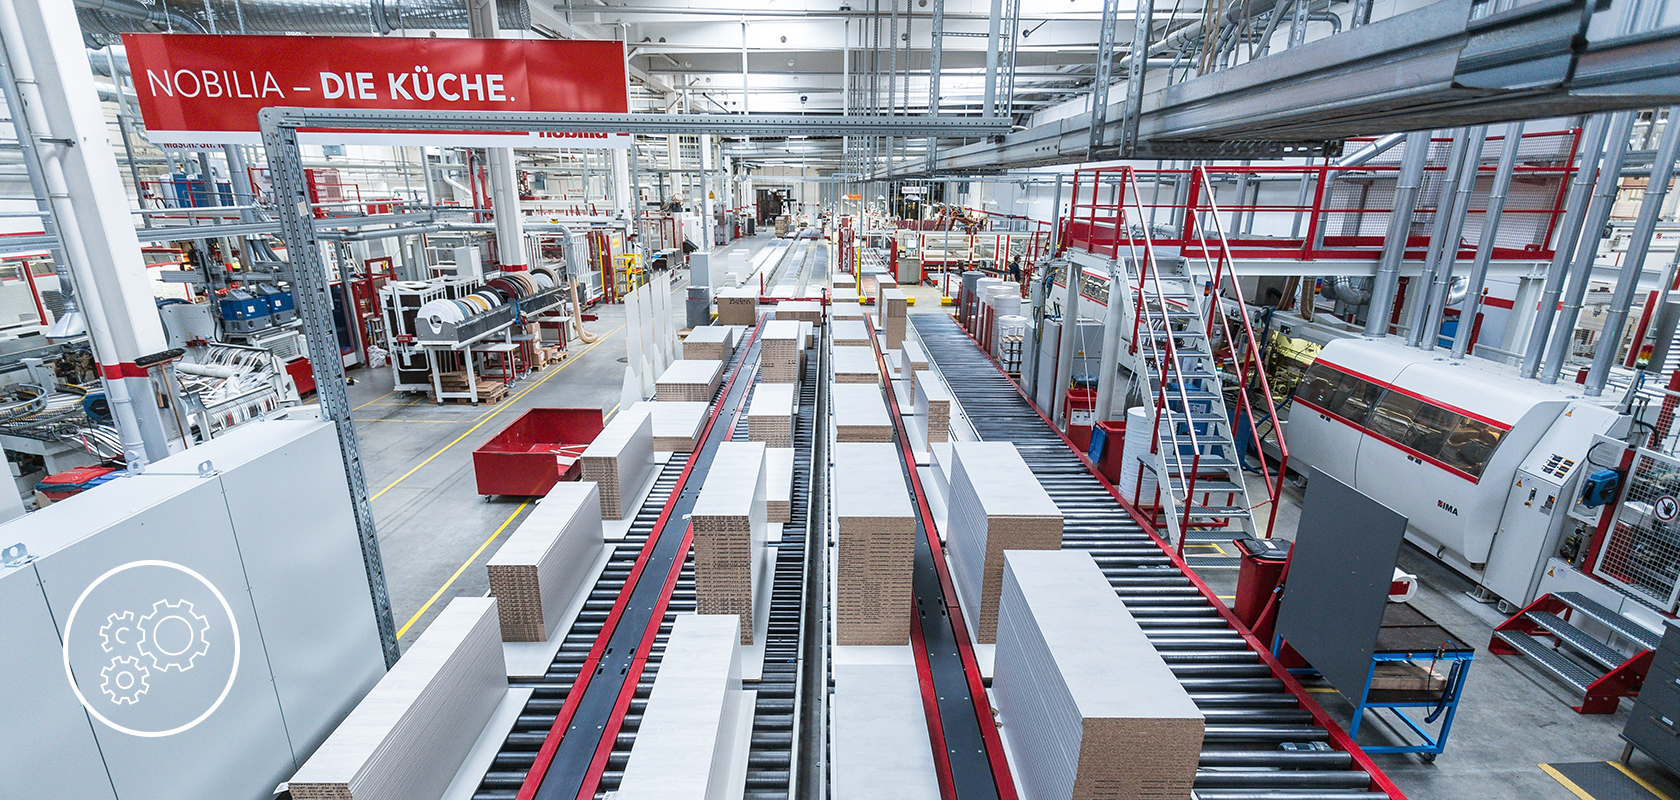 An expansive, modern manufacturing floor bustling with automated machinery and conveyor belts handling the efficient production of goods in a clean, well-lit facility.